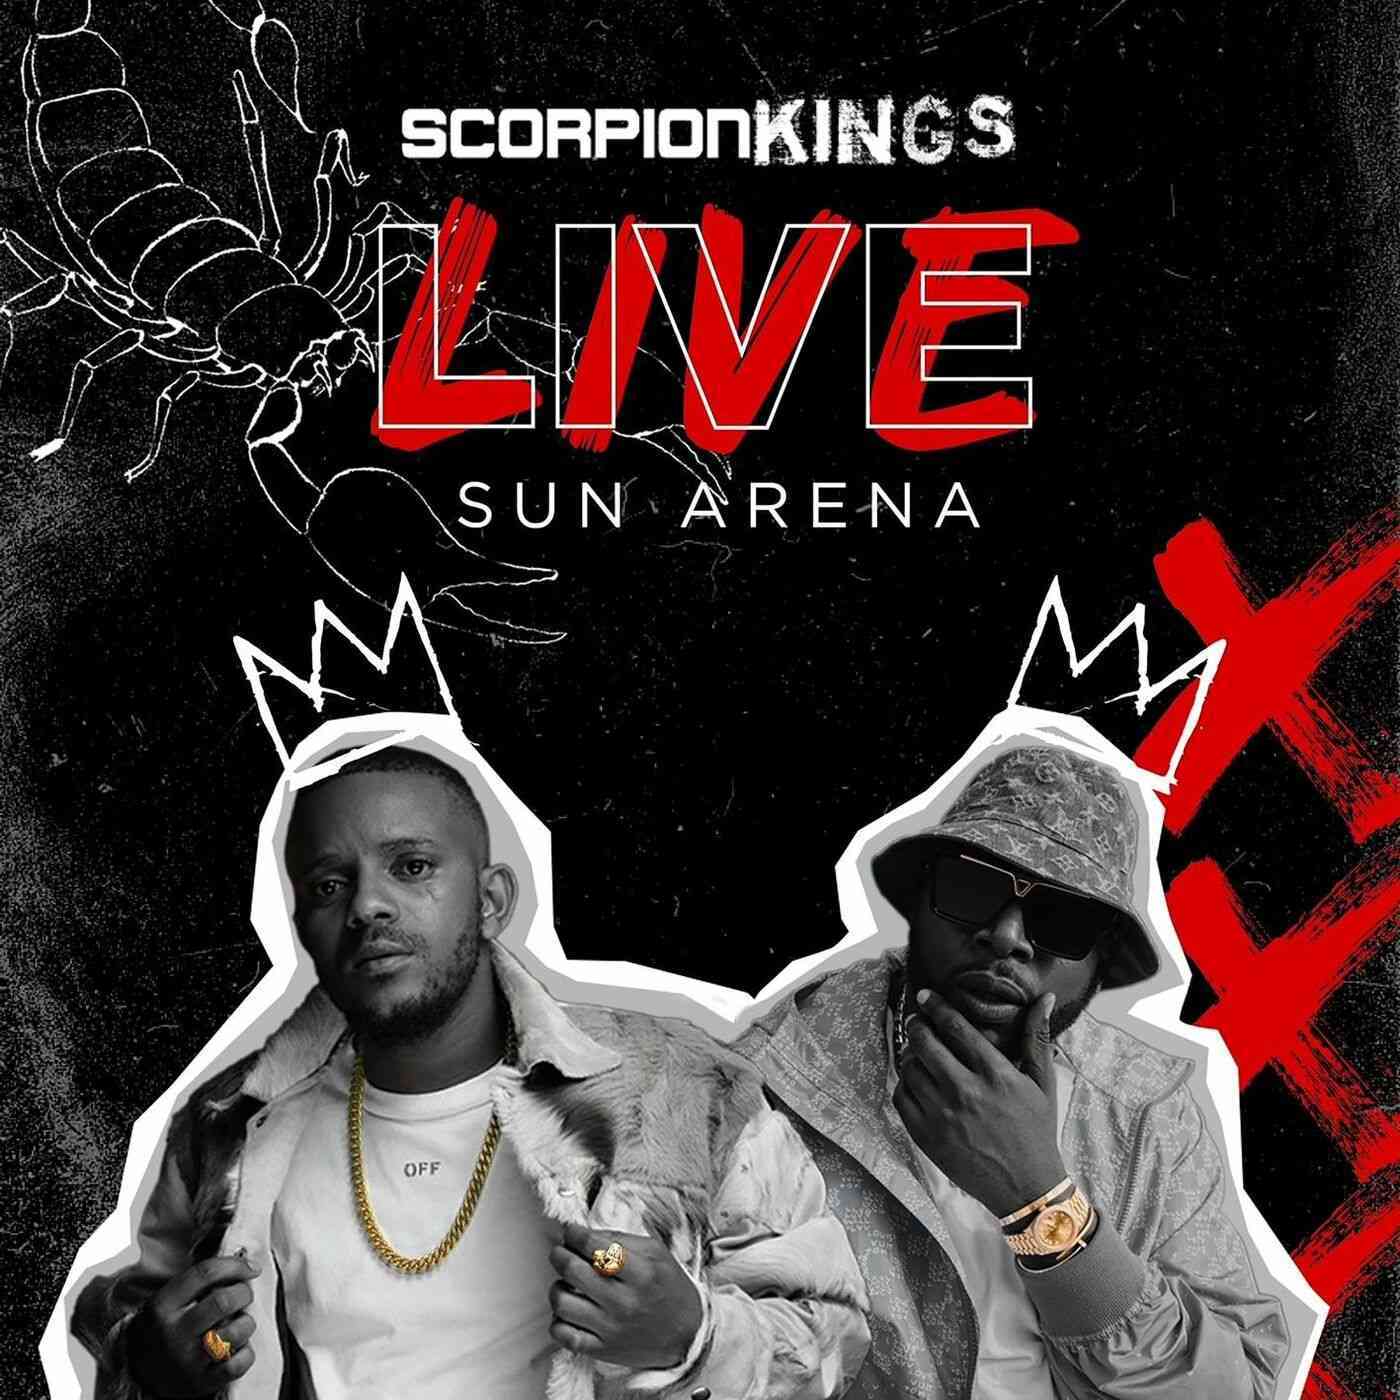 What To Expect From The Scorpion Kings Live Concept 2022 in Sun Arena 